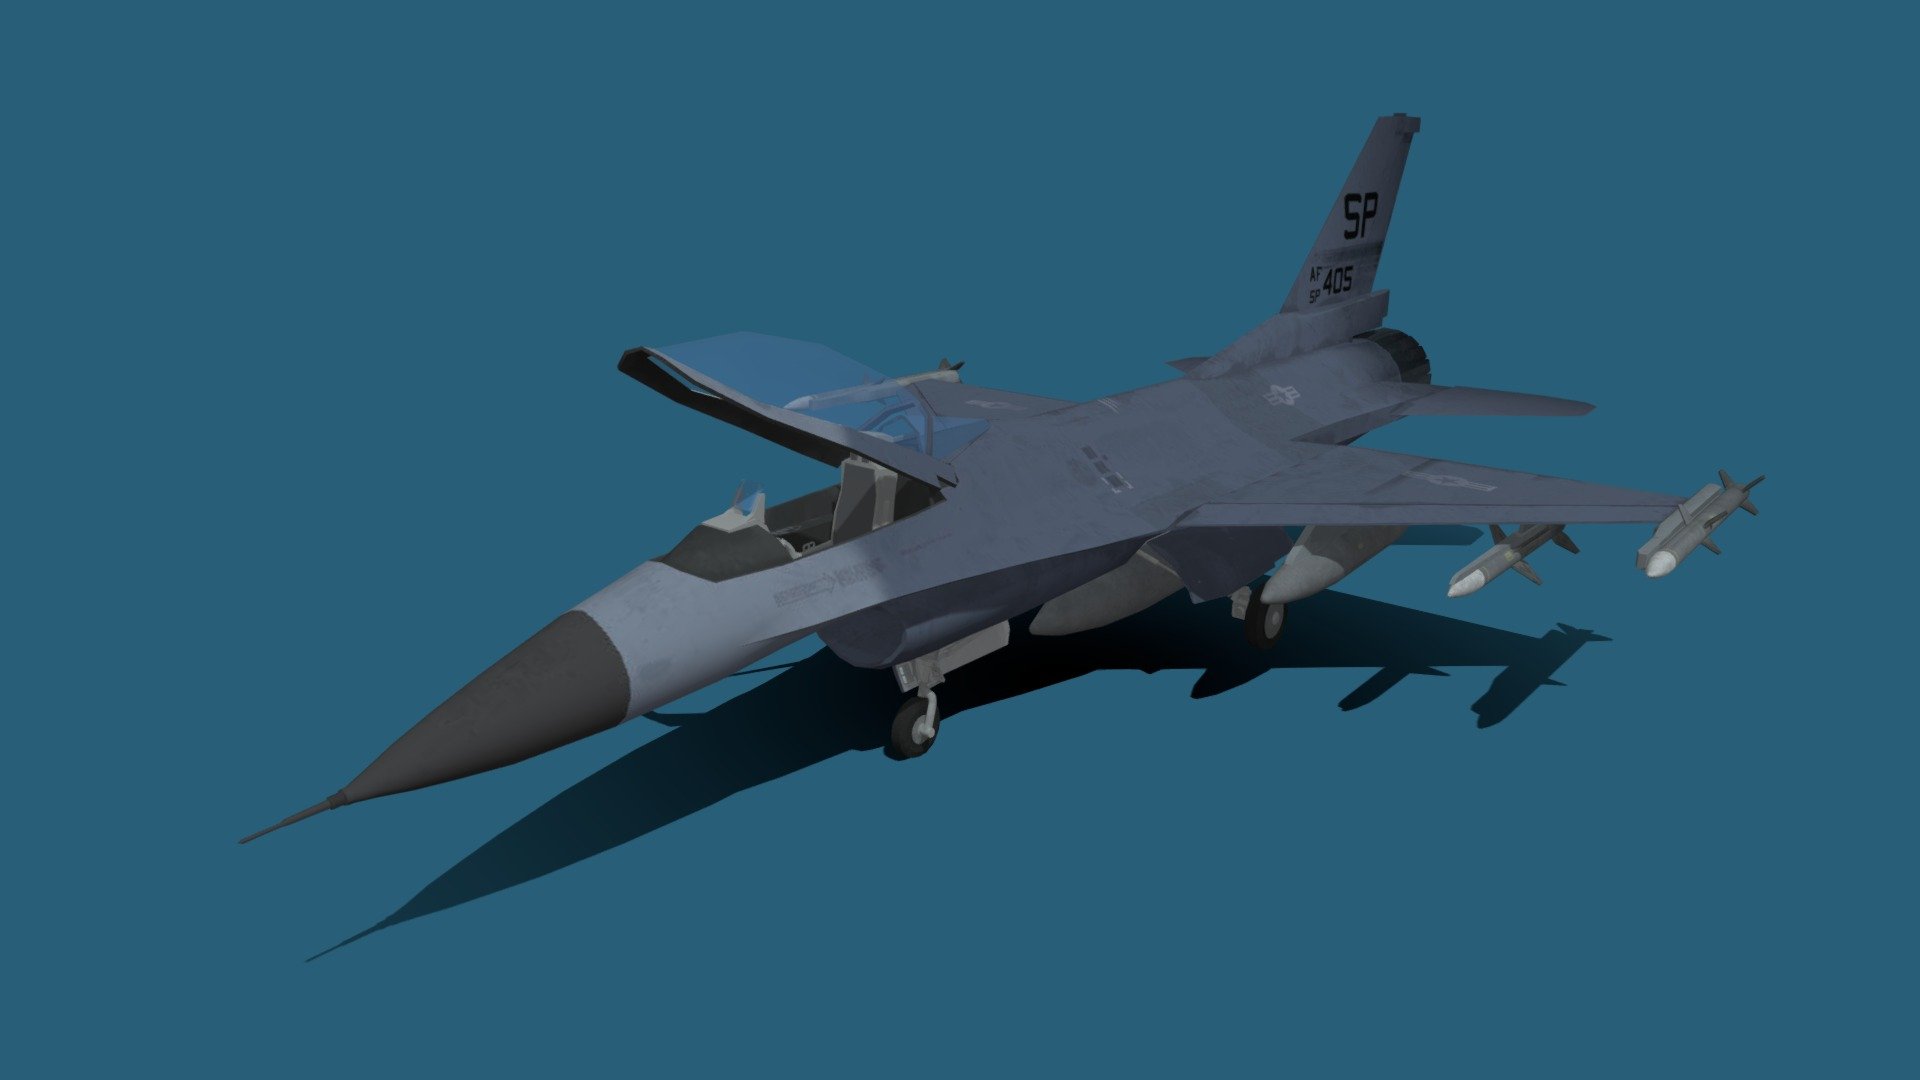 The F-16 Military Jet. I made this model for a school assignment 3d model